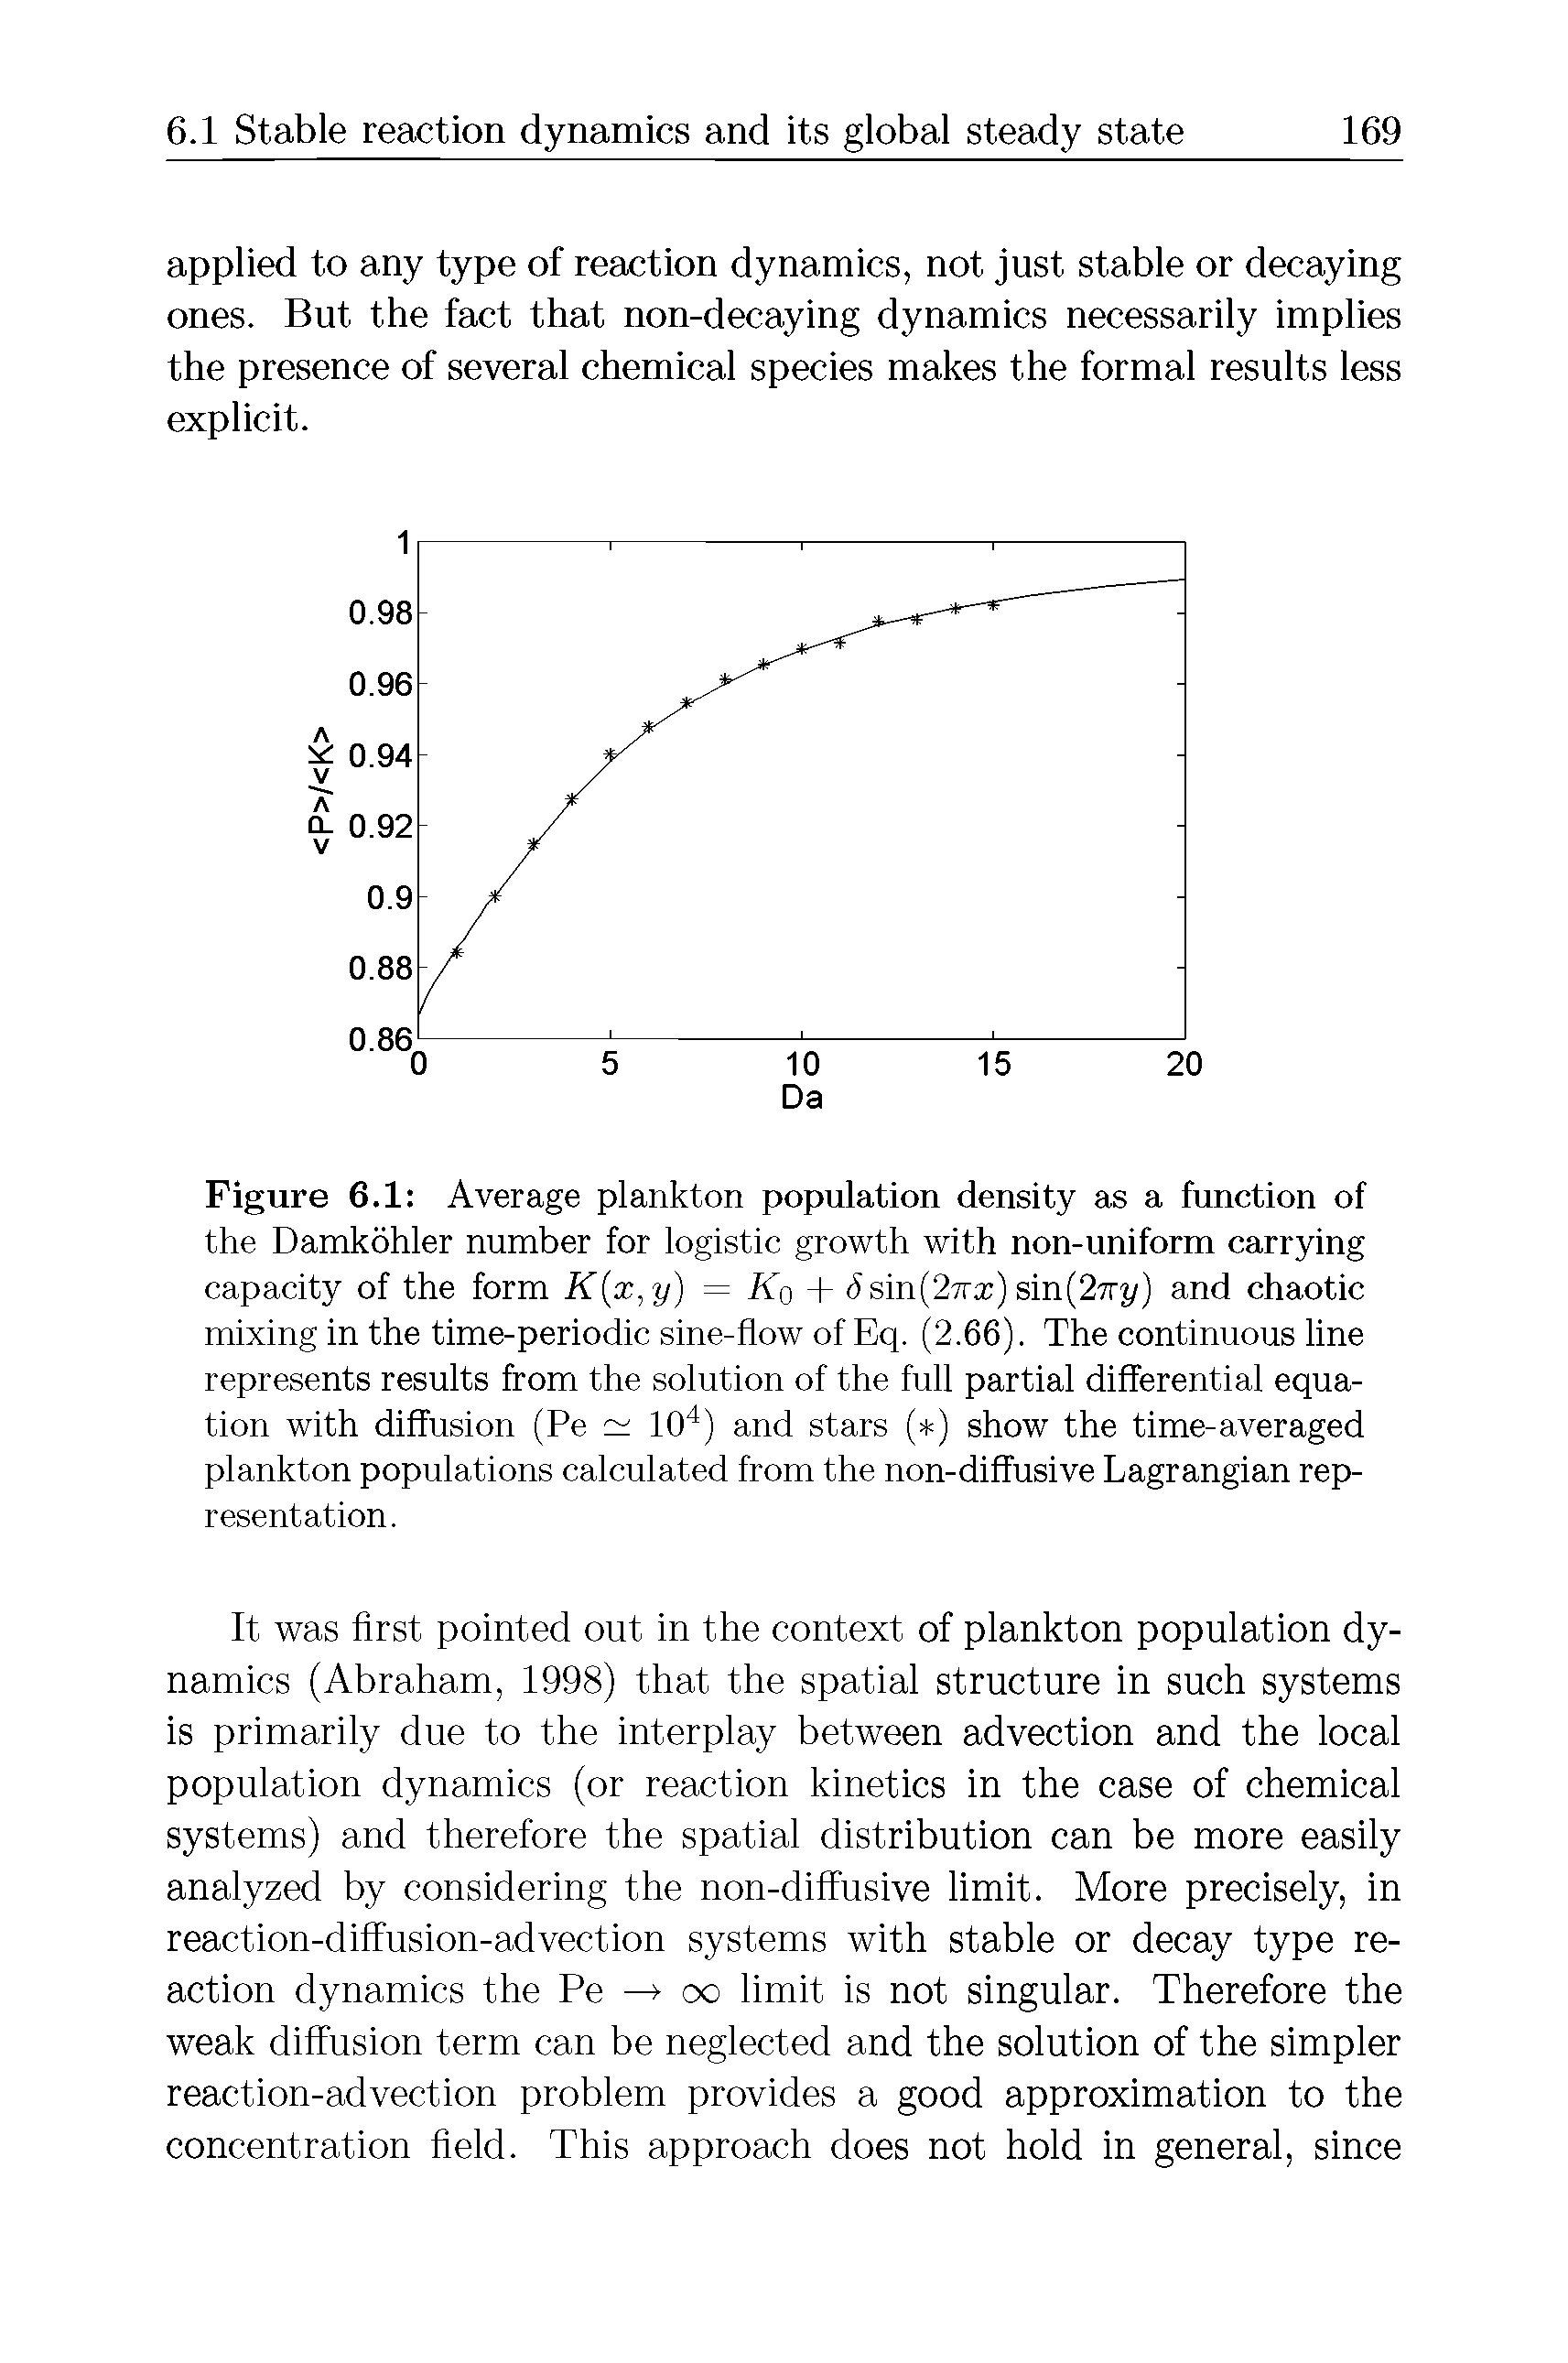 Figure 6.1 Average plankton population density as a function of the Damkohler number for logistic growth with non-uniform carrying capacity of the form K(x,y) = Kq + (5sin(27rx) sin(27ry) and chaotic mixing in the time-periodic sine-flow of Eq. (2.66). The continuous line represents results from the solution of the full partial differential equation with diffusion (Pe 104) and stars ( ) show the time-averaged plankton populations calculated from the non-diffusive Lagrangian representation.